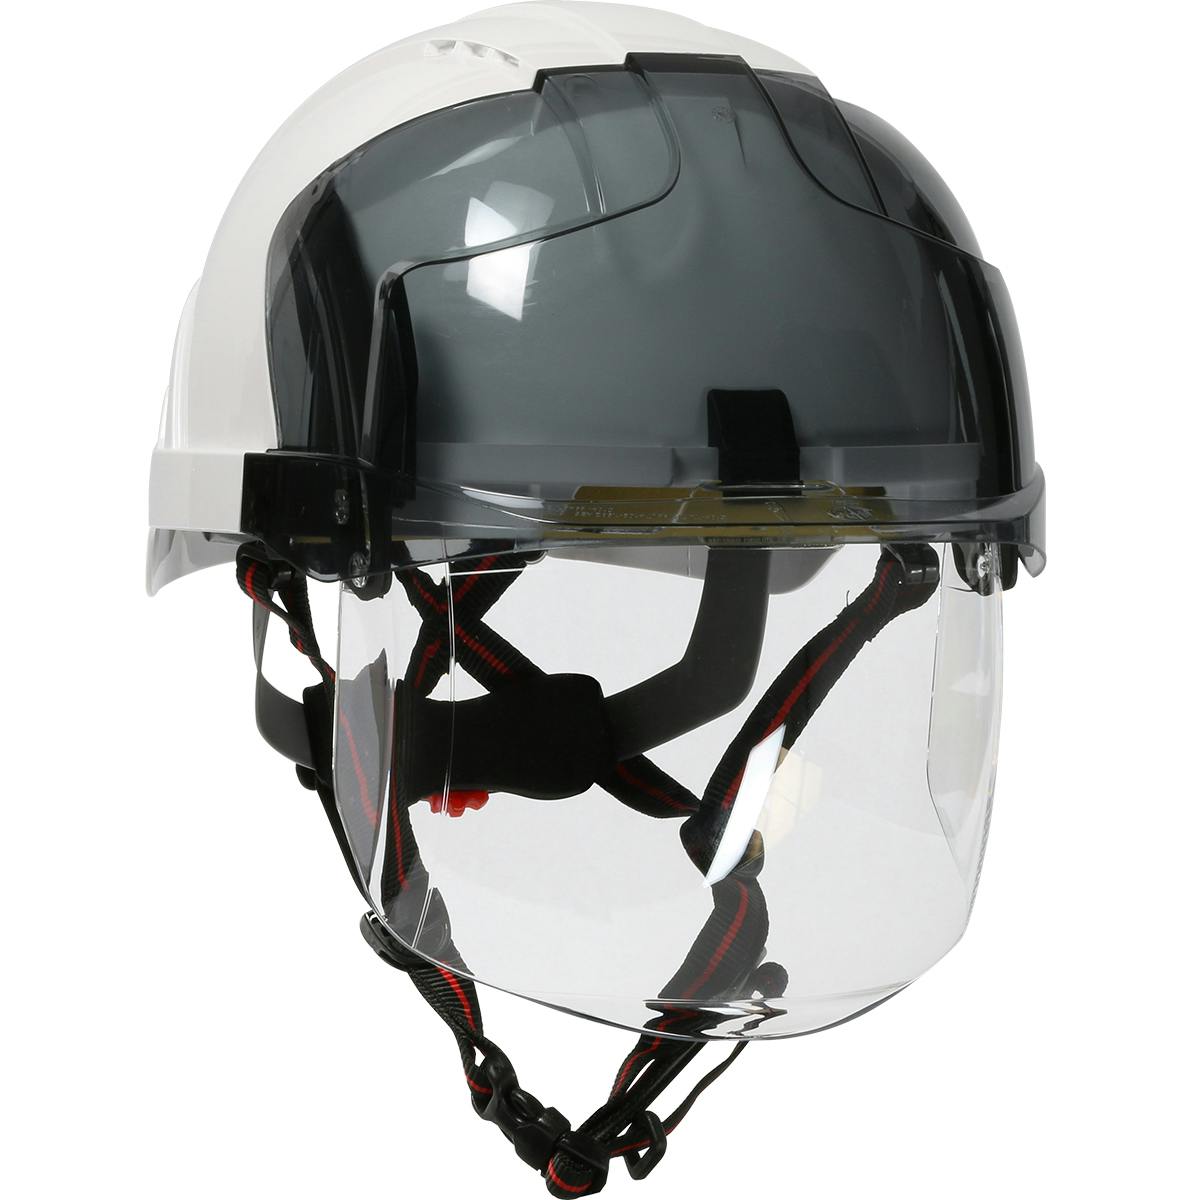 Type I, Non-vented Industrial Safety Helmet with fully adjustable four point chinstrap, Lightweight ABS Shell, Integrated Faceshield, 6-Point Polyester Suspension and Wheel Ratchet Adjustment, White-Smoke (280-EVSN-CH) - OS_2